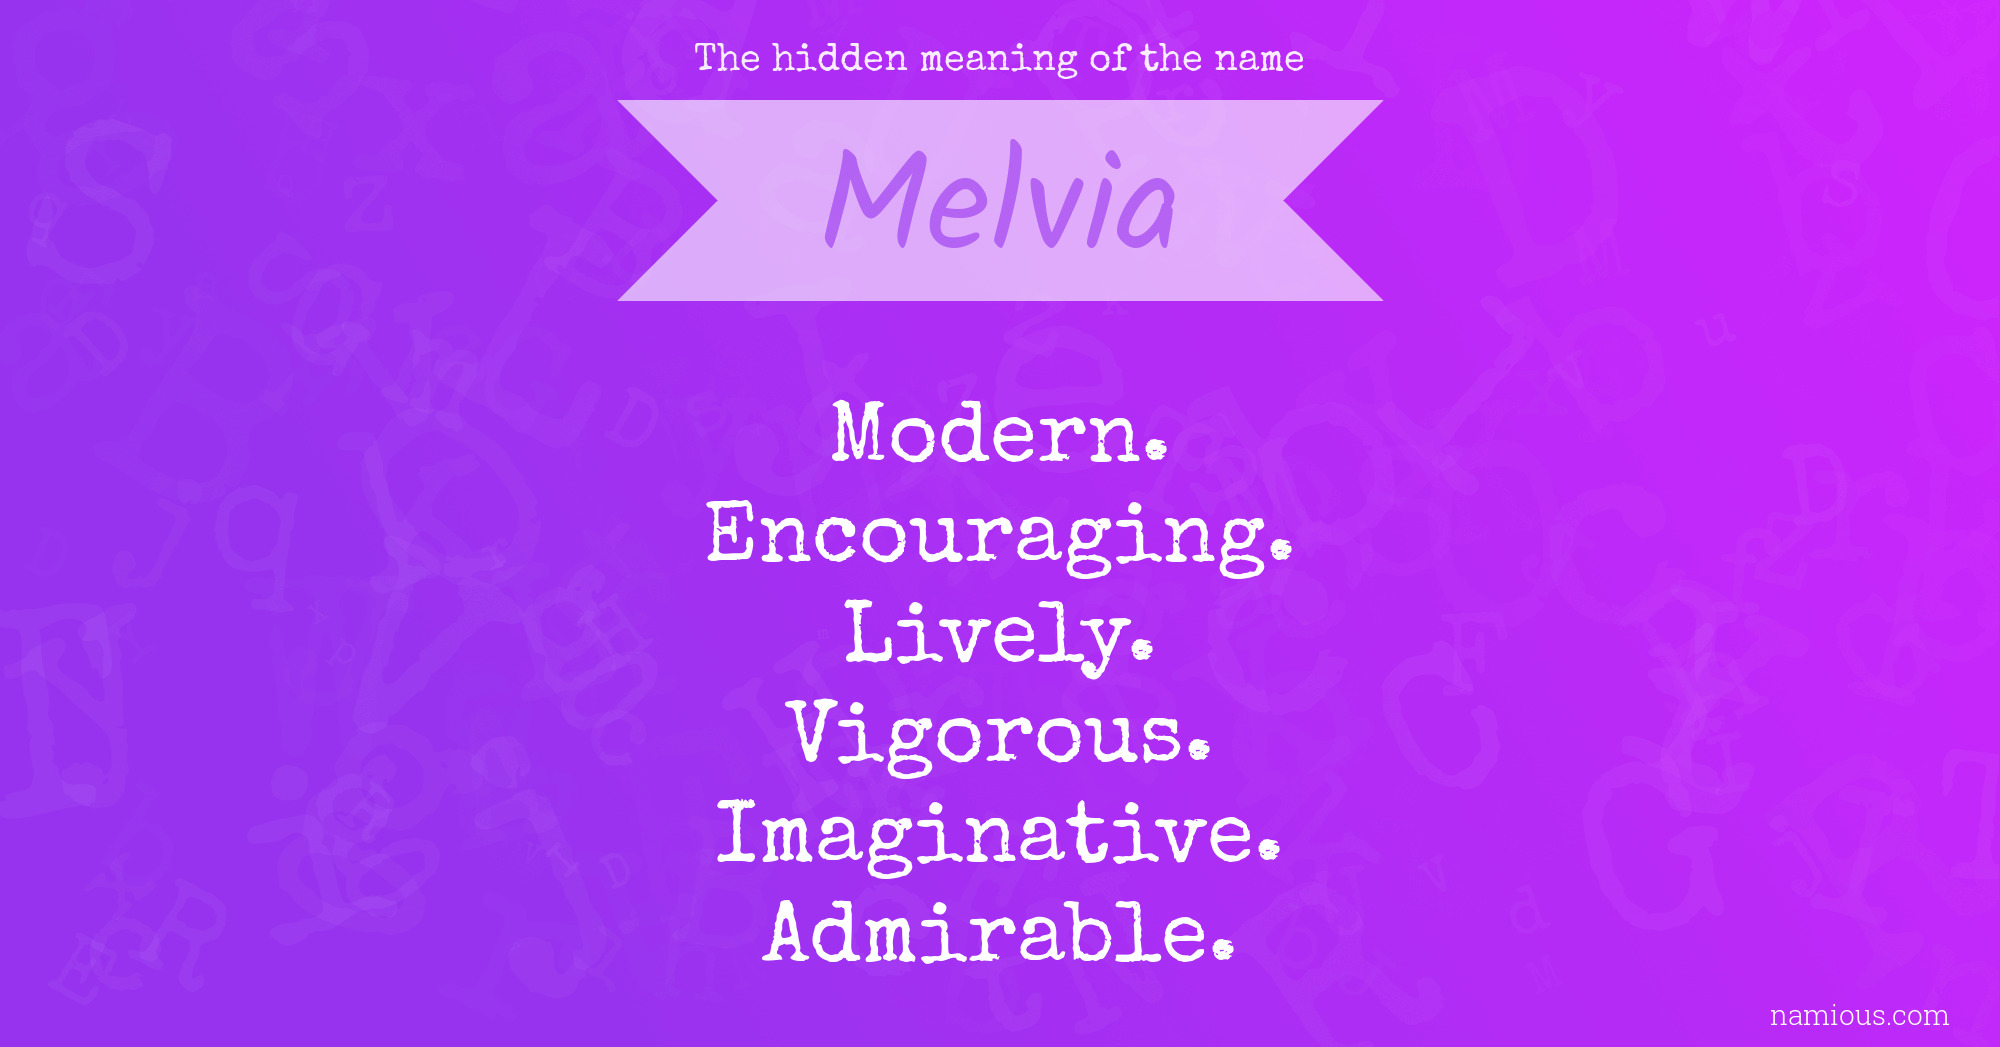 The hidden meaning of the name Melvia